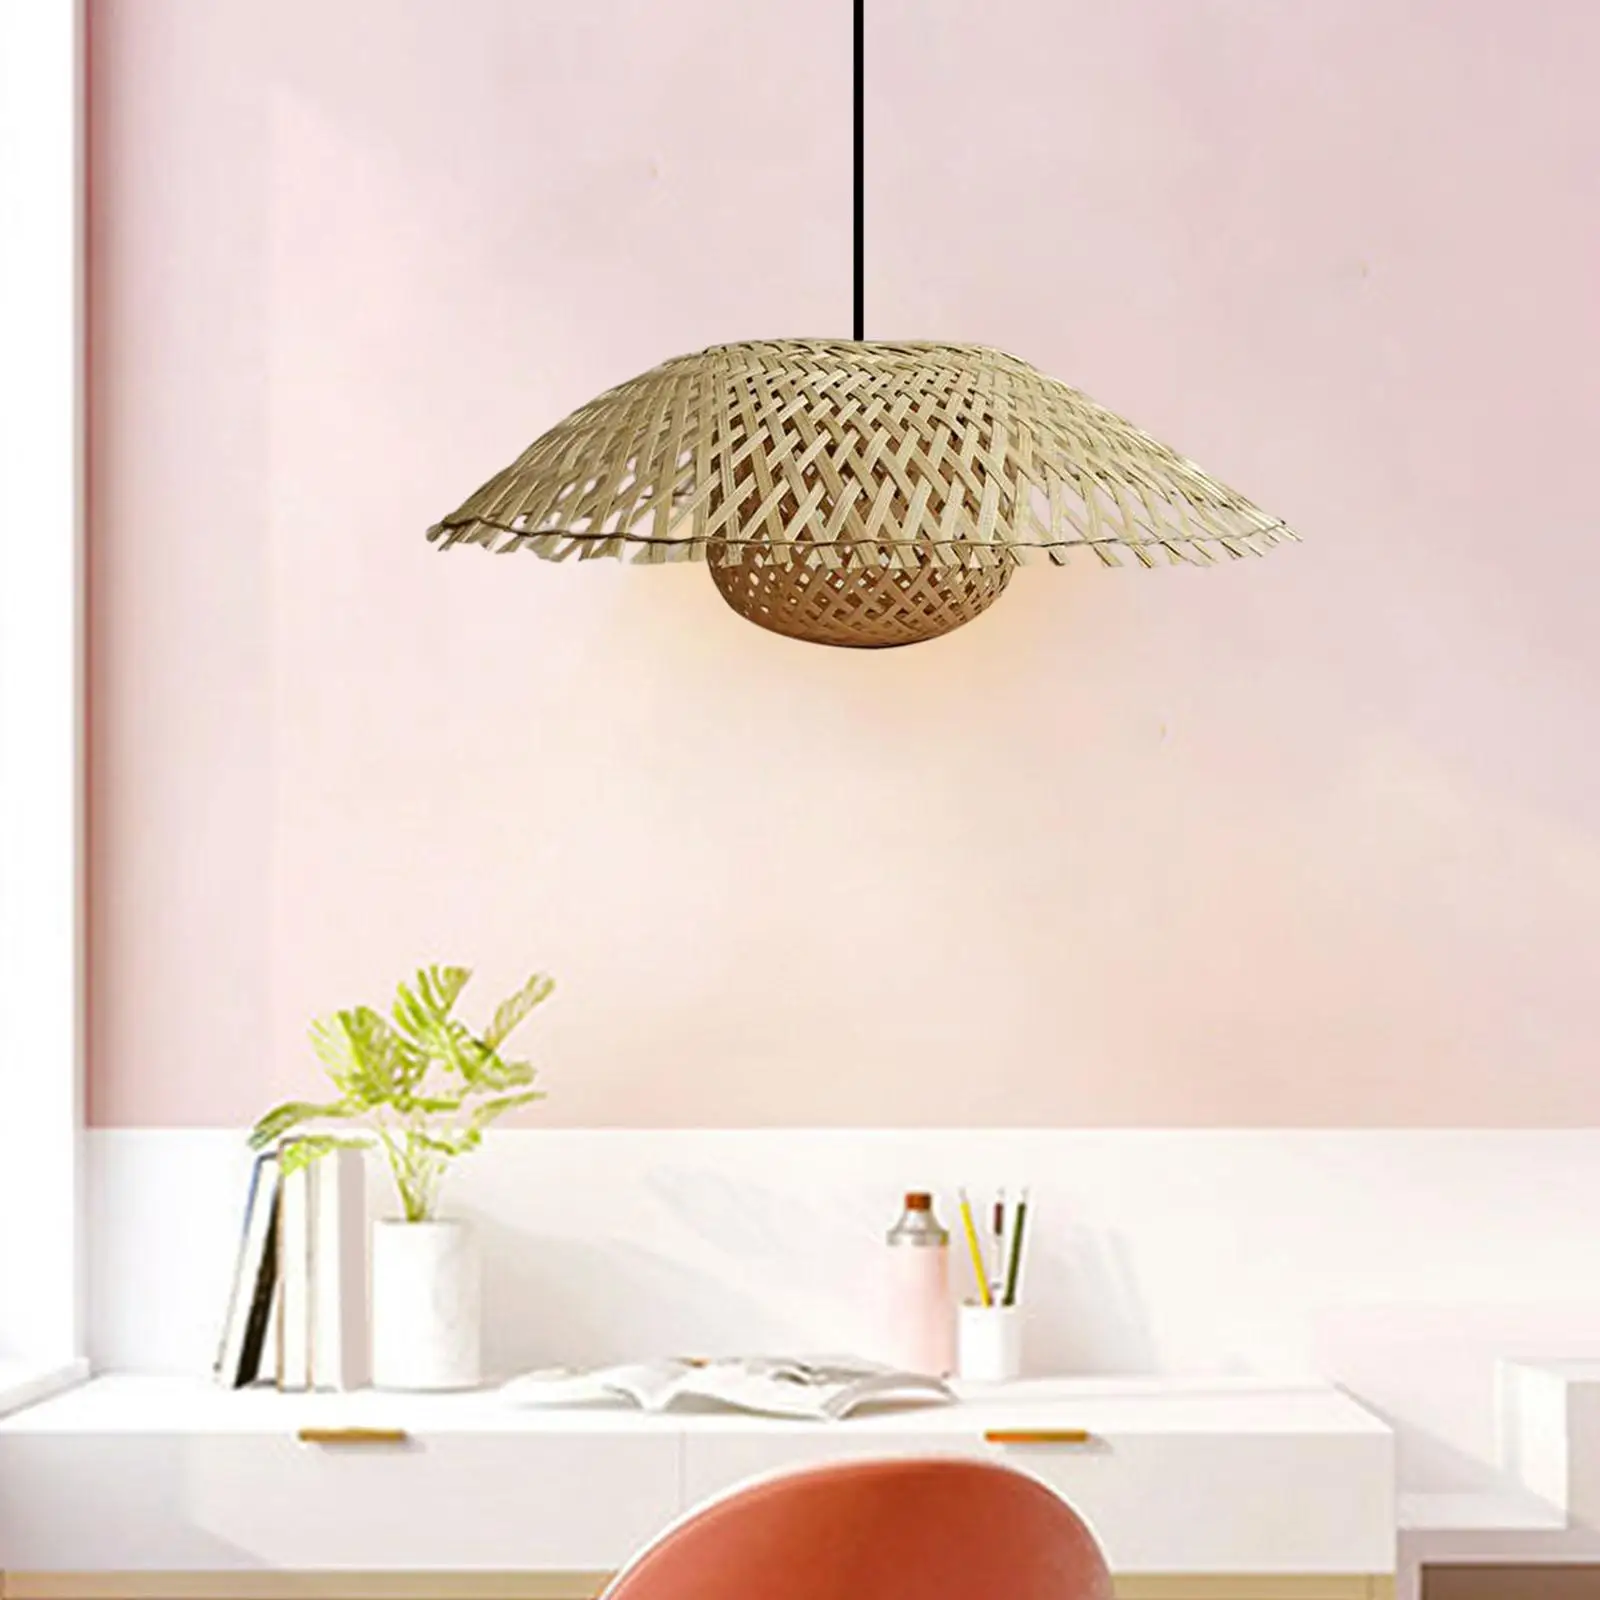 Bamboo Lamp Shade Woven Pendant Light Shade for Dining Table Home Hallway